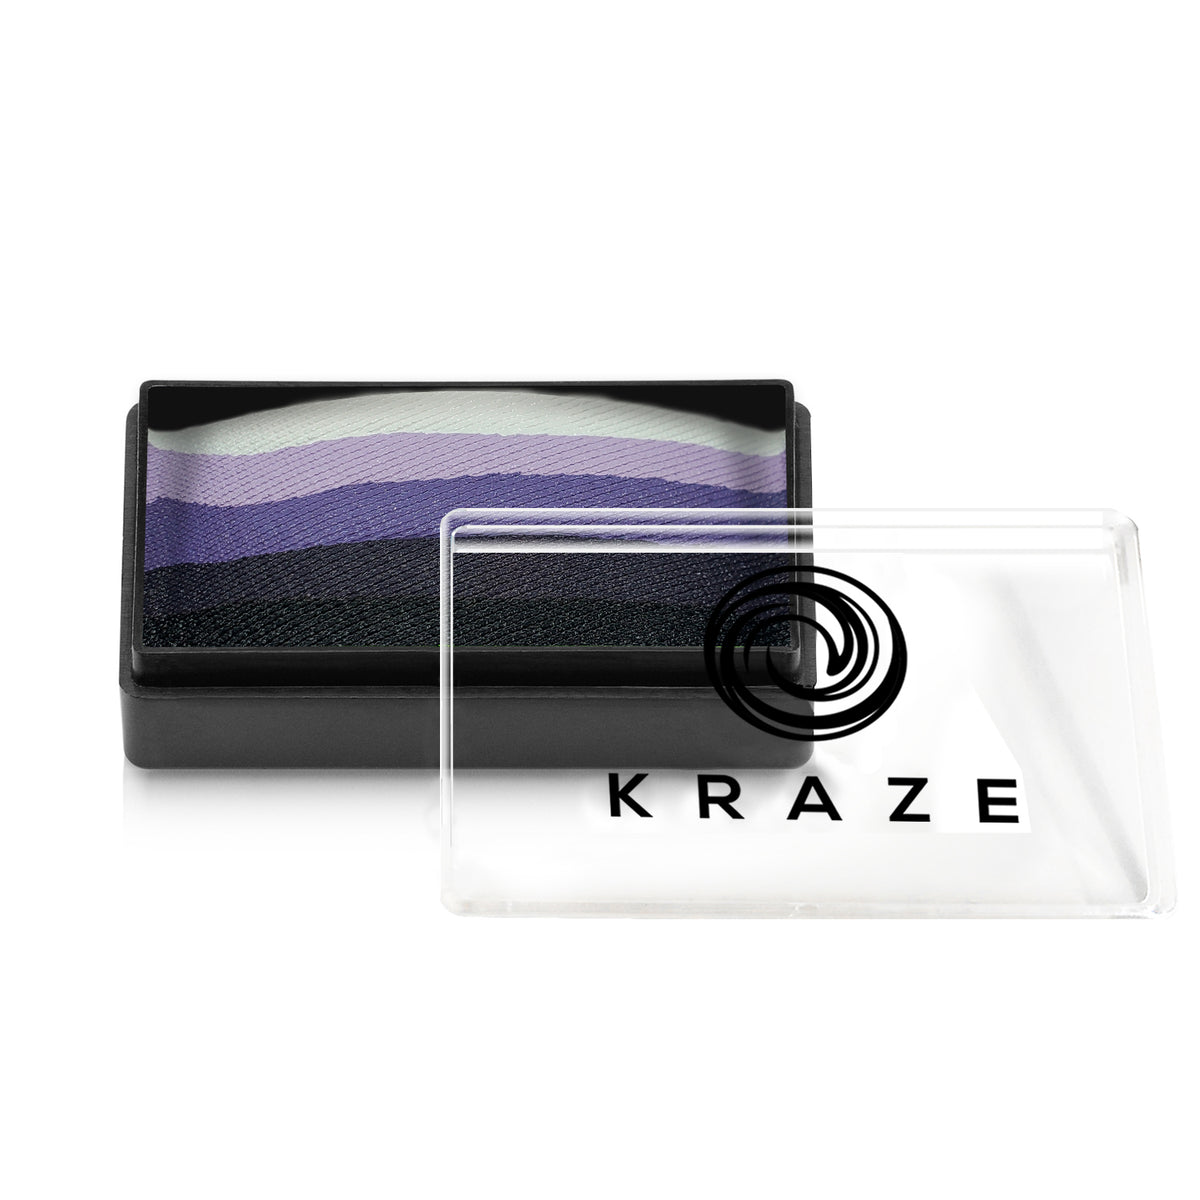 Kraze Dome Stroke Bold and Brilliant Collection by Jacqueline Howe - Amethyst (25 gm)